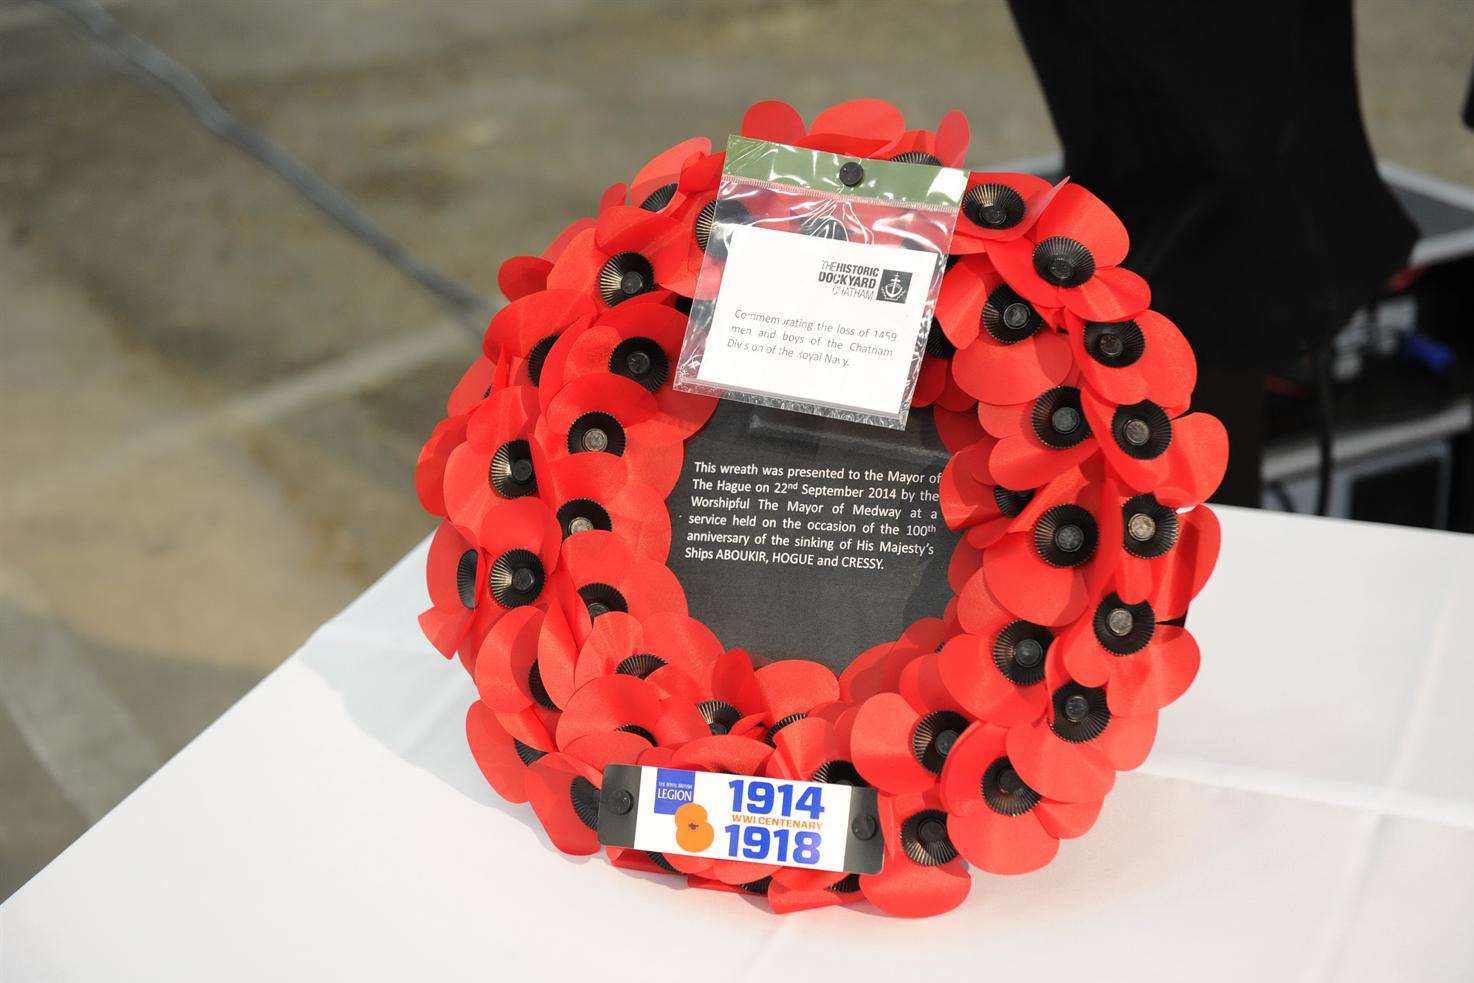 Wreath handed over to a representative of the Mayor of Hague at a memorial service to commemorate the deaths of 1,459 sailors during one of the biggest naval disasters of the First World War.